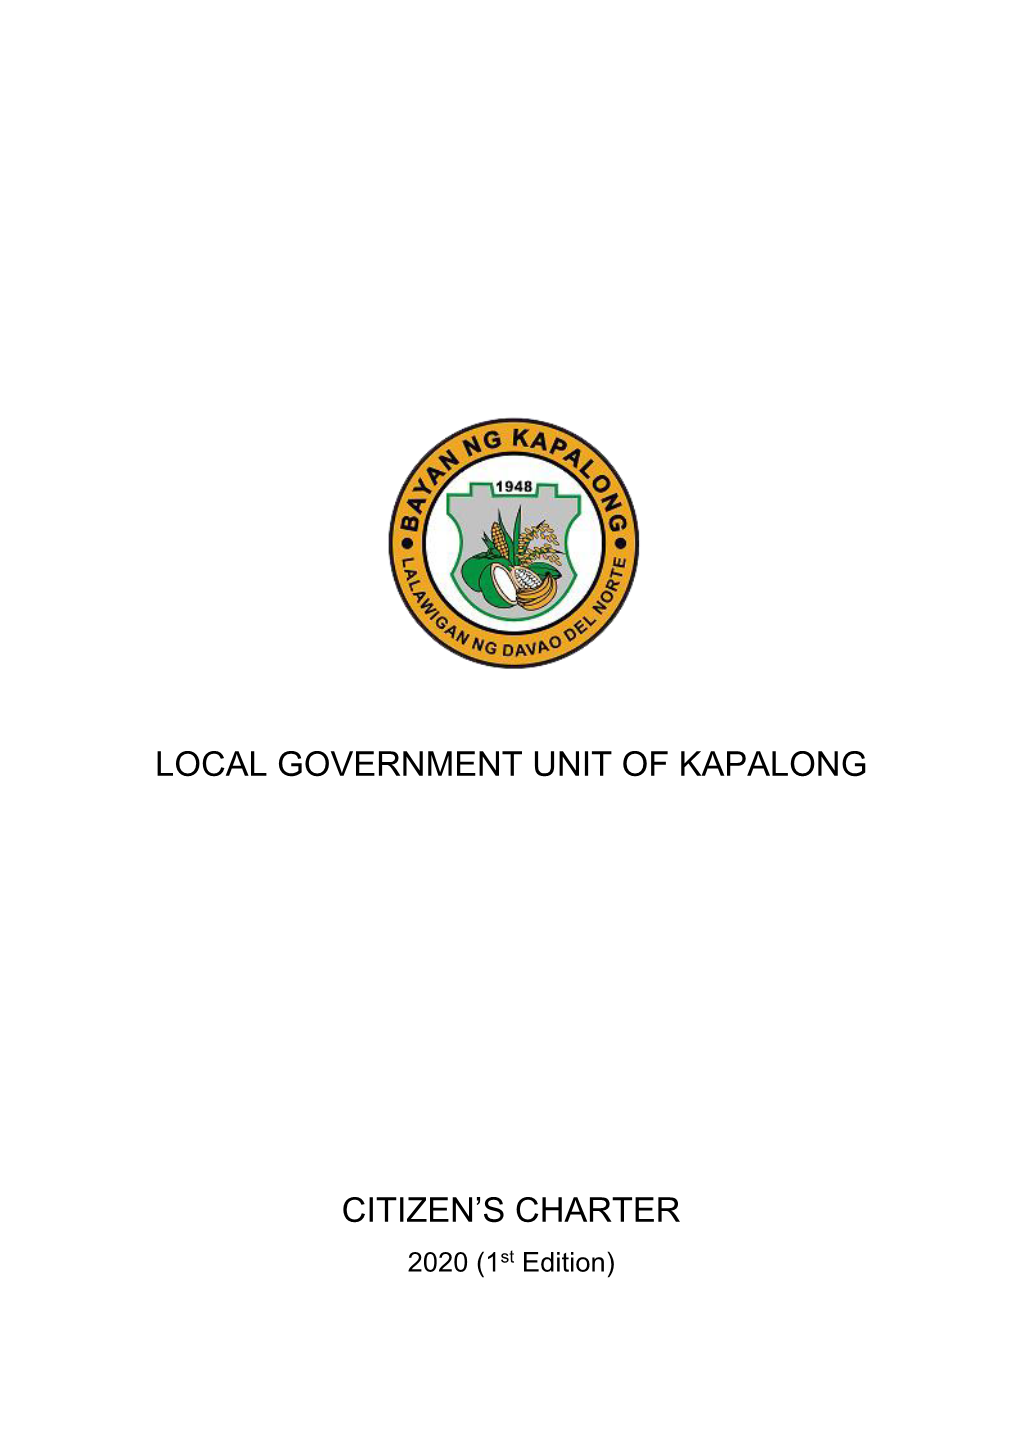 Local Government Unit of Kapalong Citizen's Charter